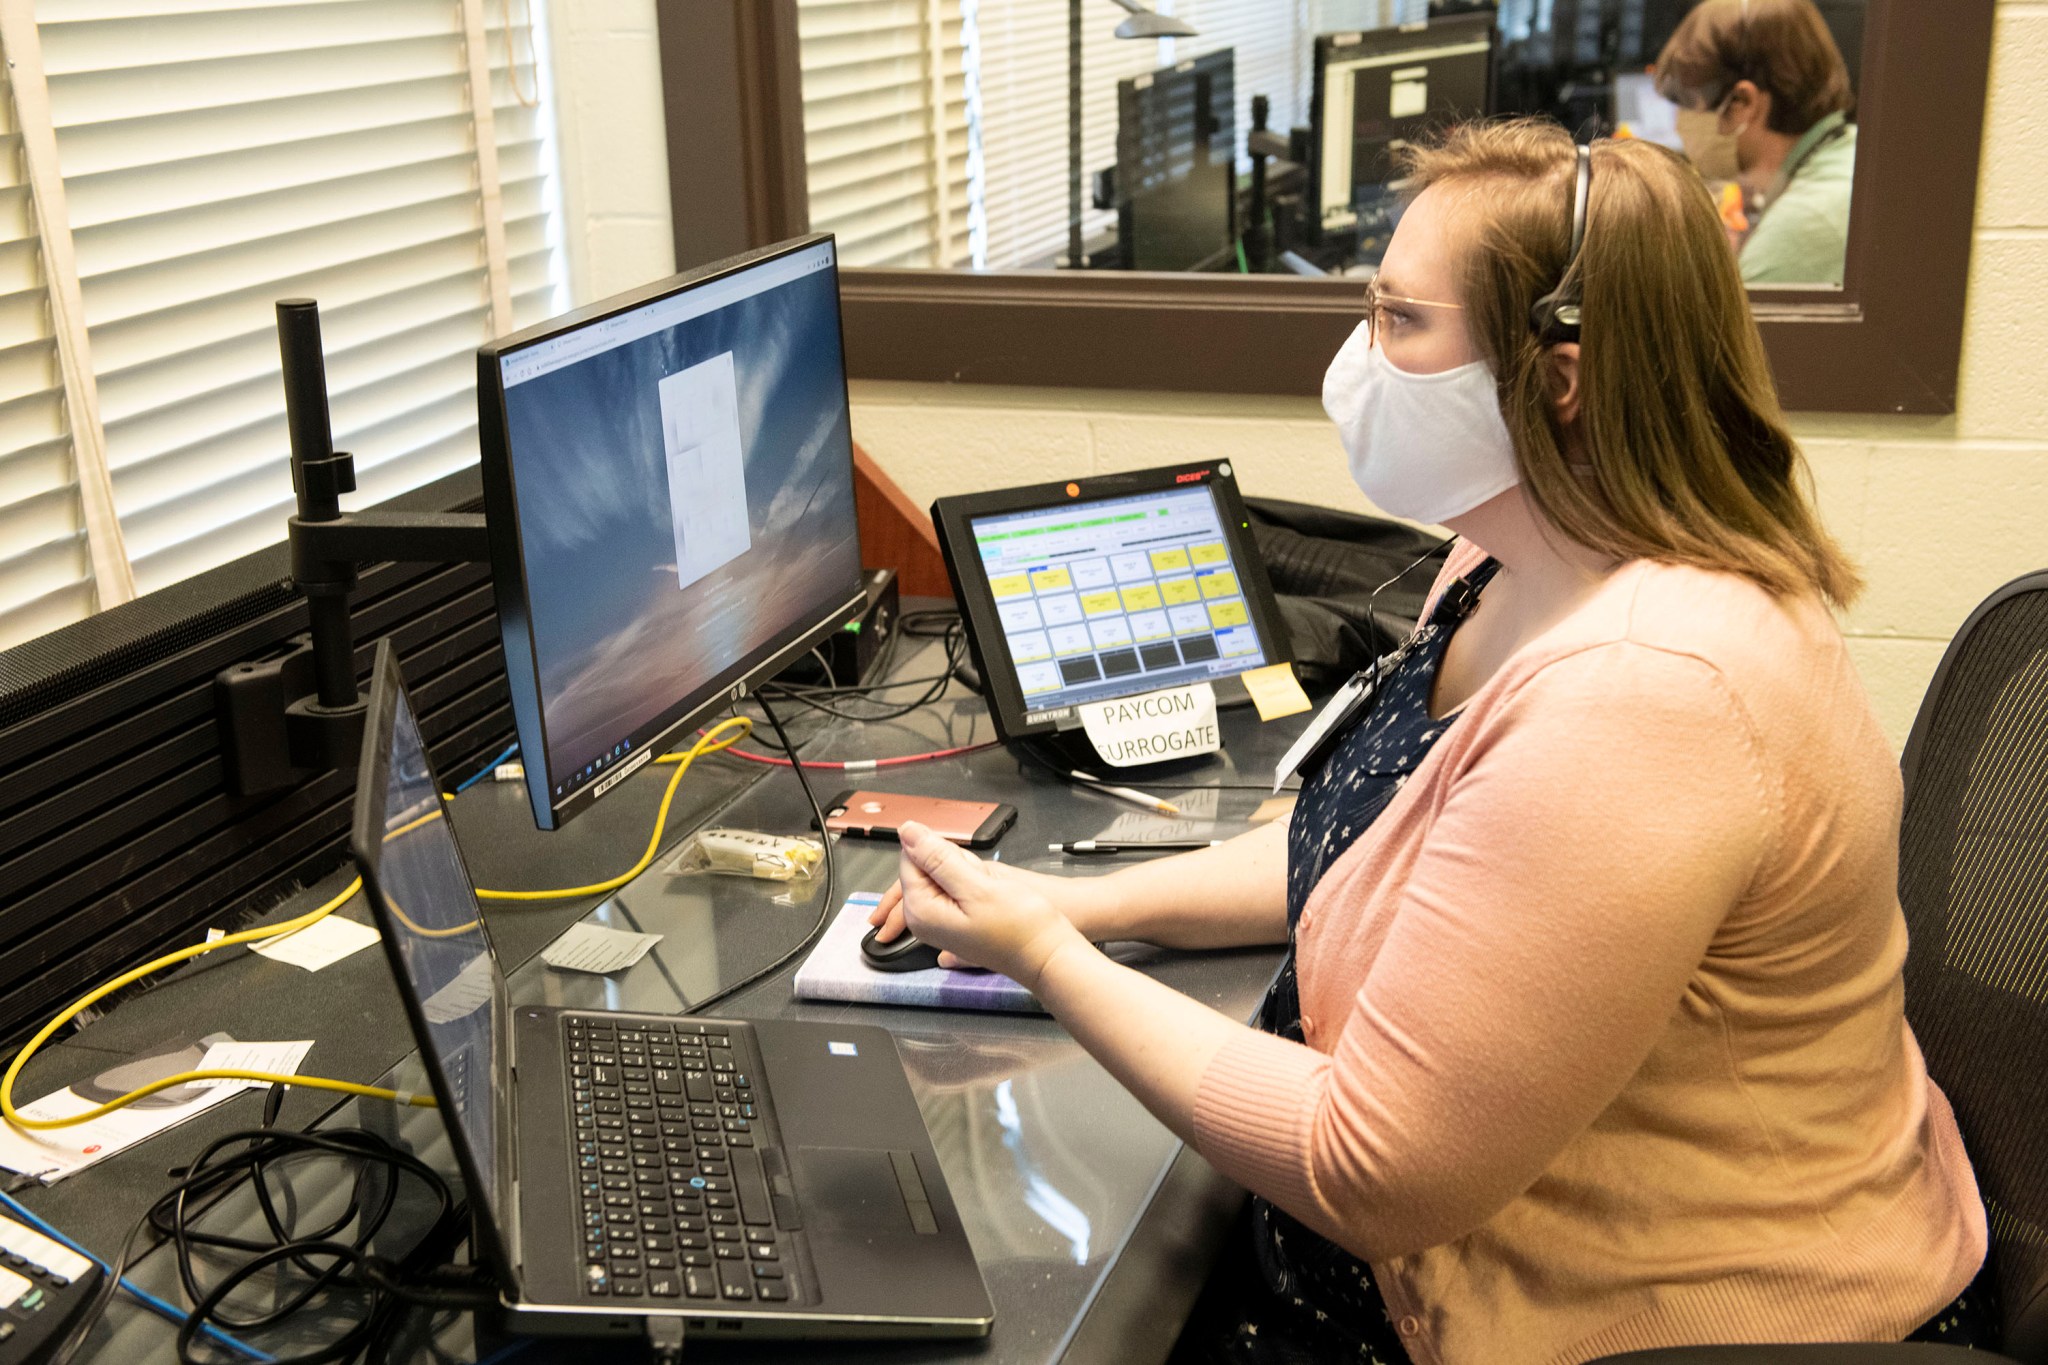 Crystal Klemmer, an Aerodyne Industries engineer at Marshall, monitors the Crew-1 launch from the mission control room.